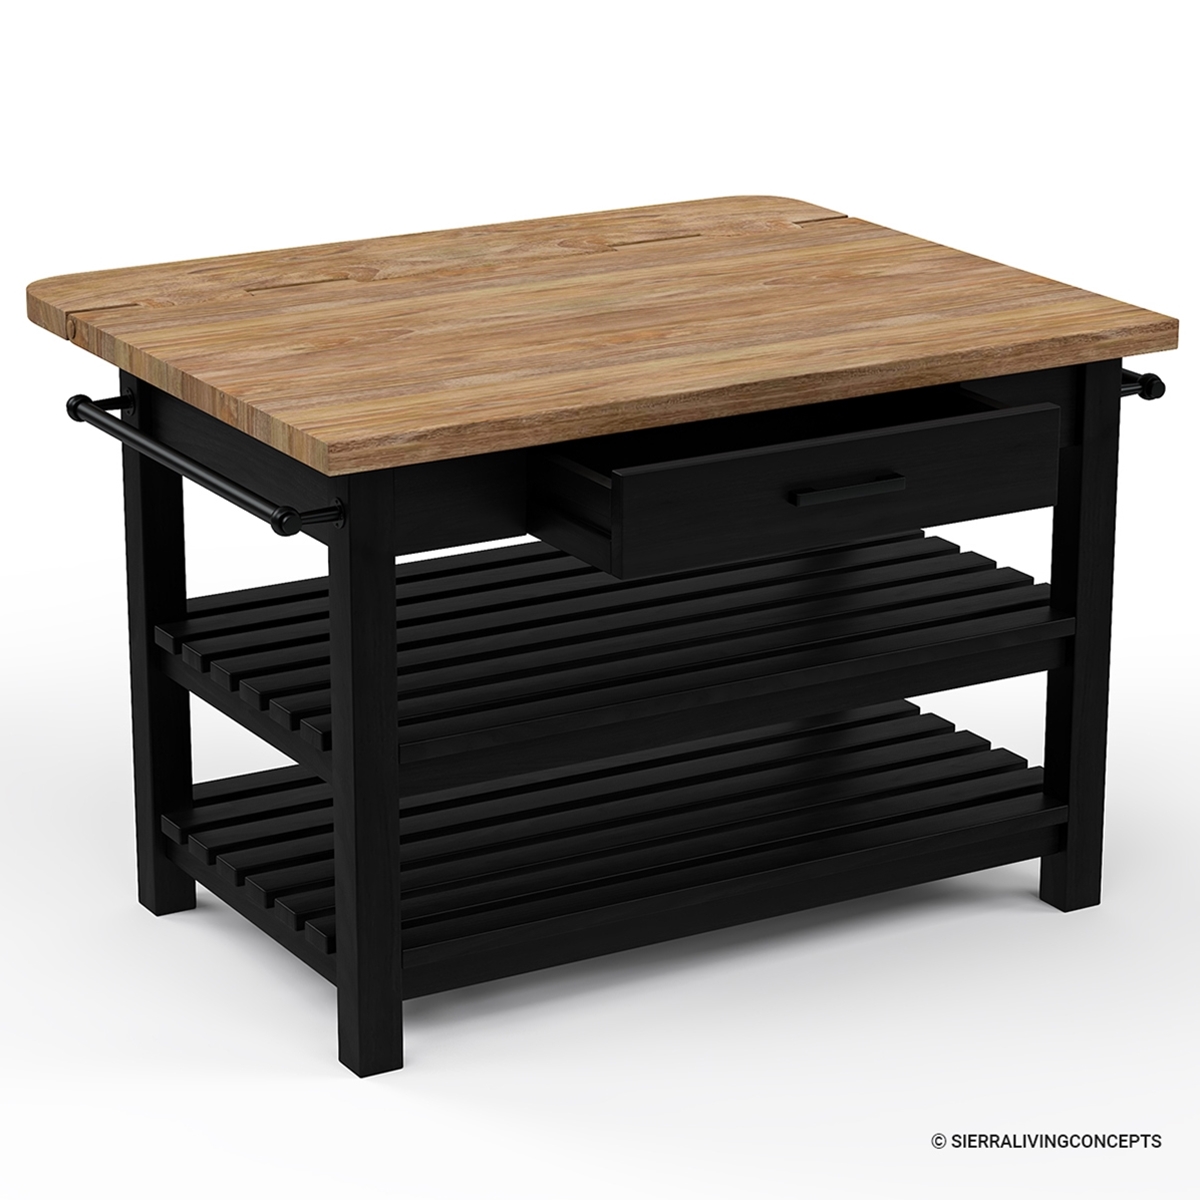 https://www.sierralivingconcepts.com/images/thumbs/0409205_catania-solid-wood-farmhouse-kitchen-island-with-drop-leaf.jpeg